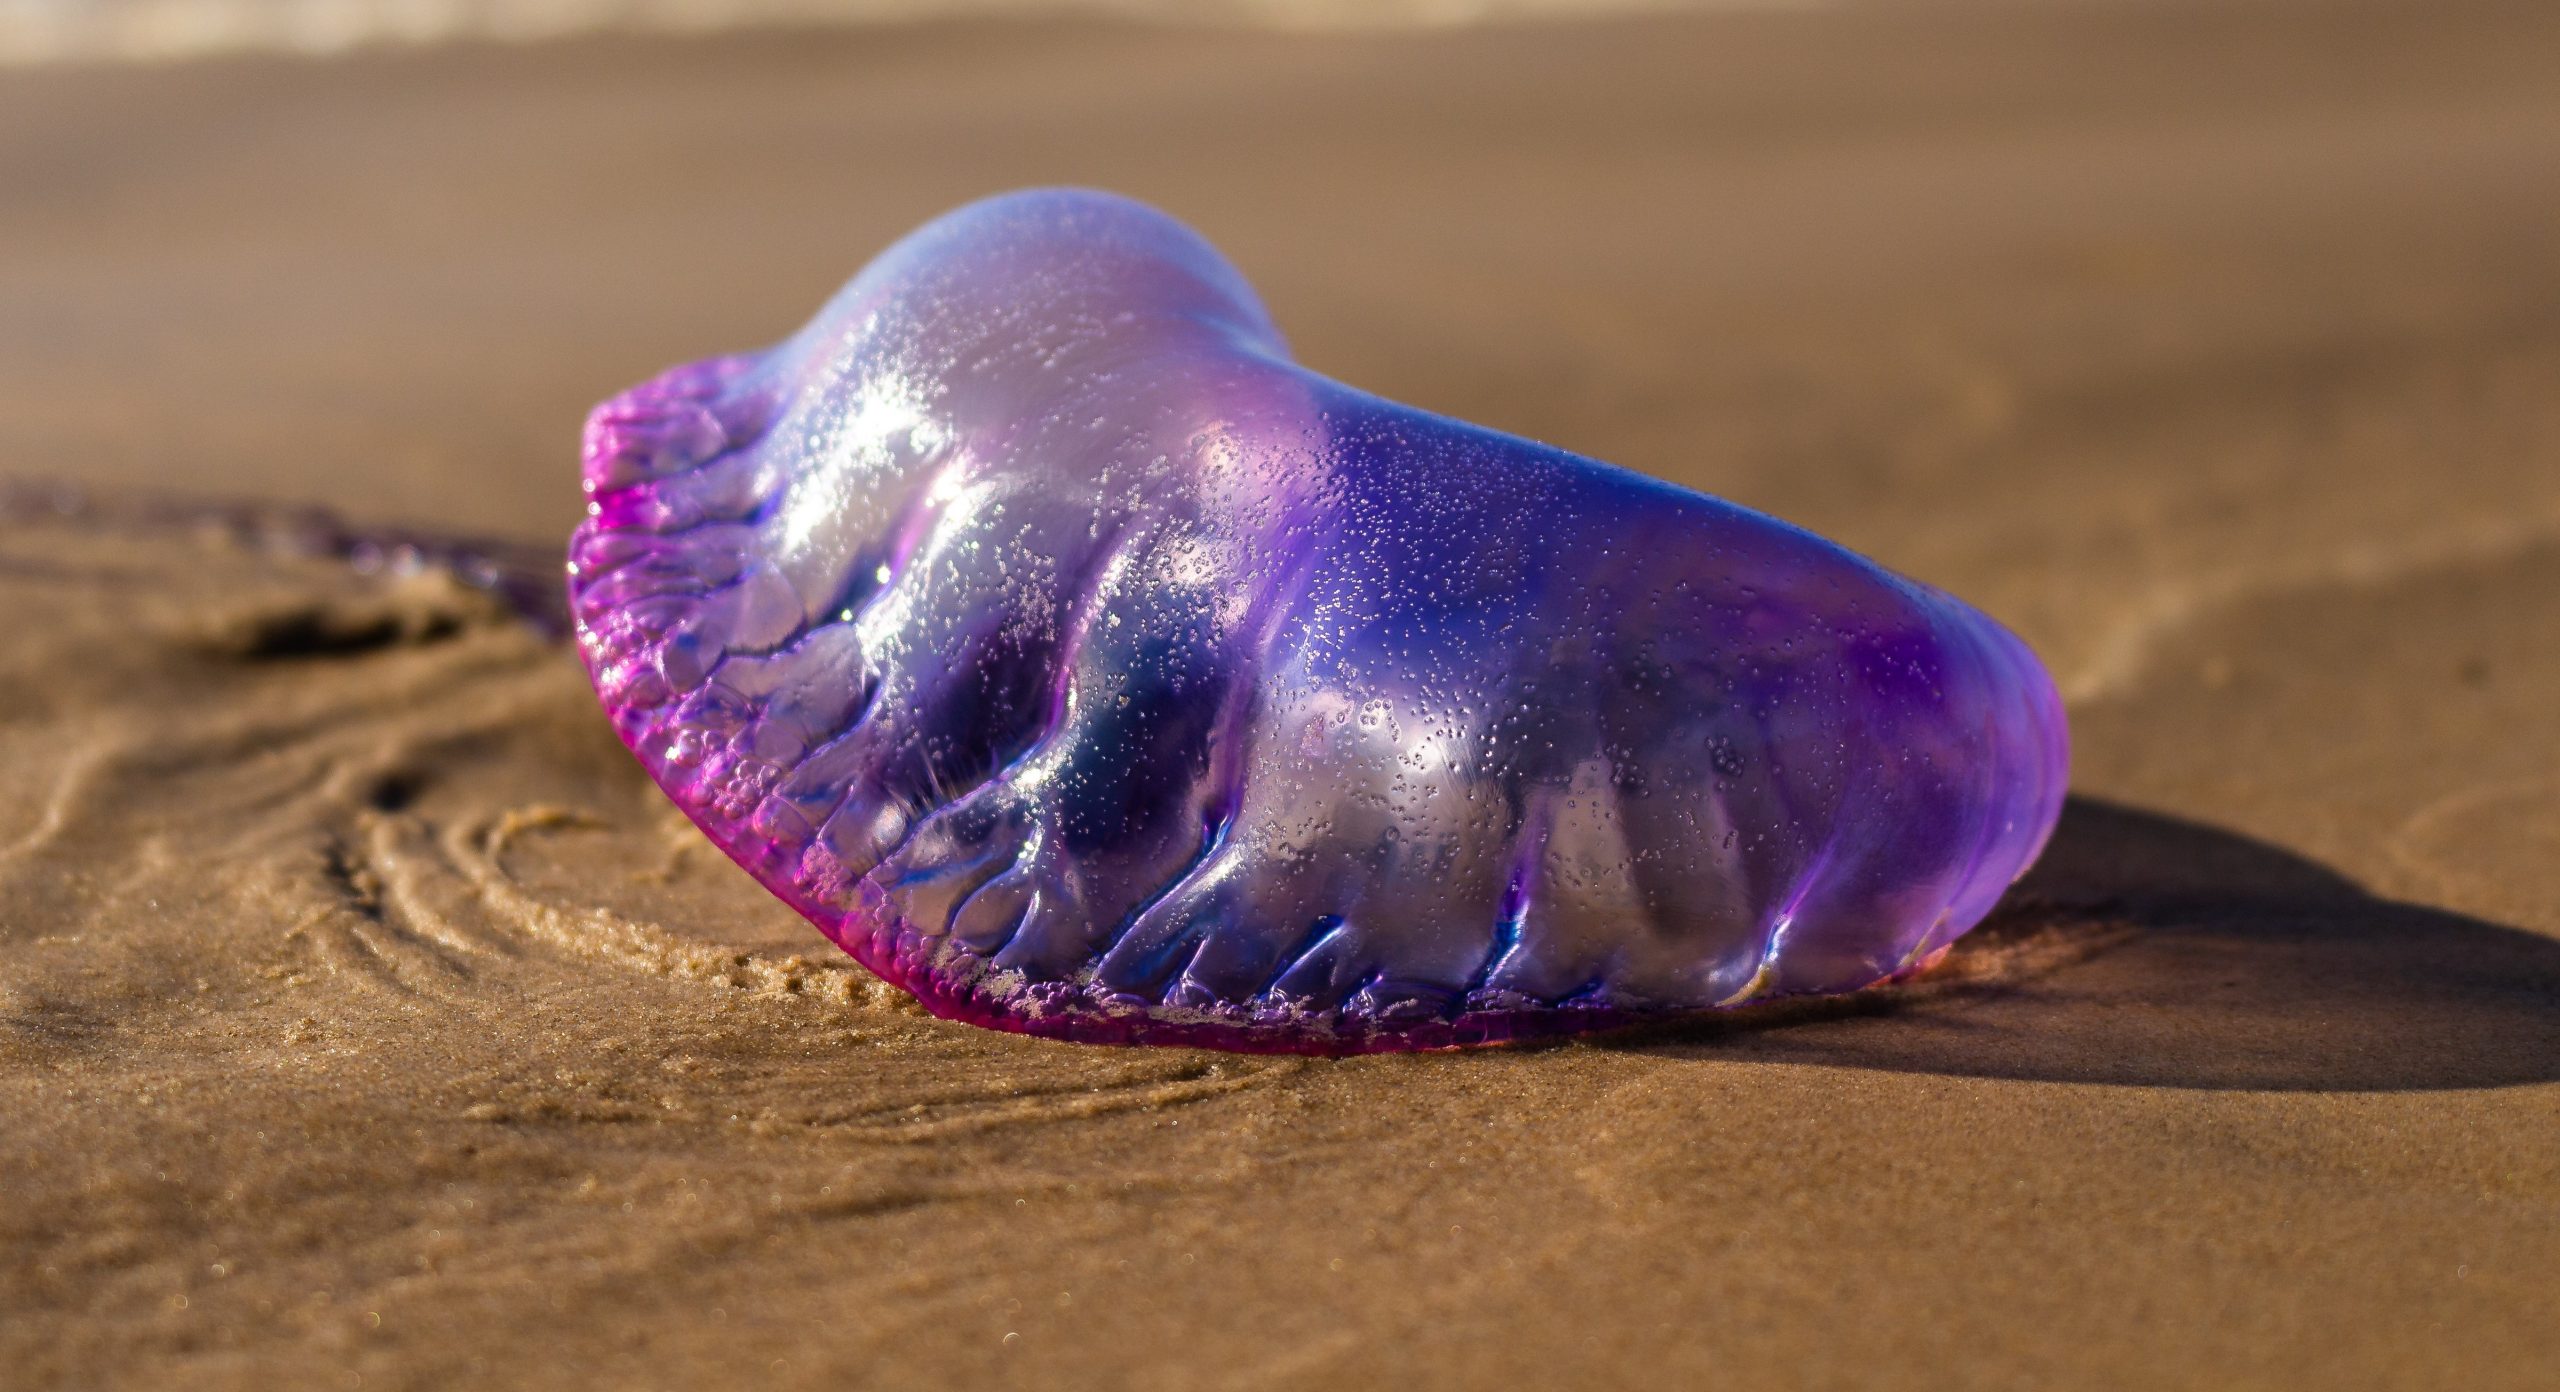 First spring sightings of poisonous Portuguese Man O'War in Spain's Costa Blanca waters